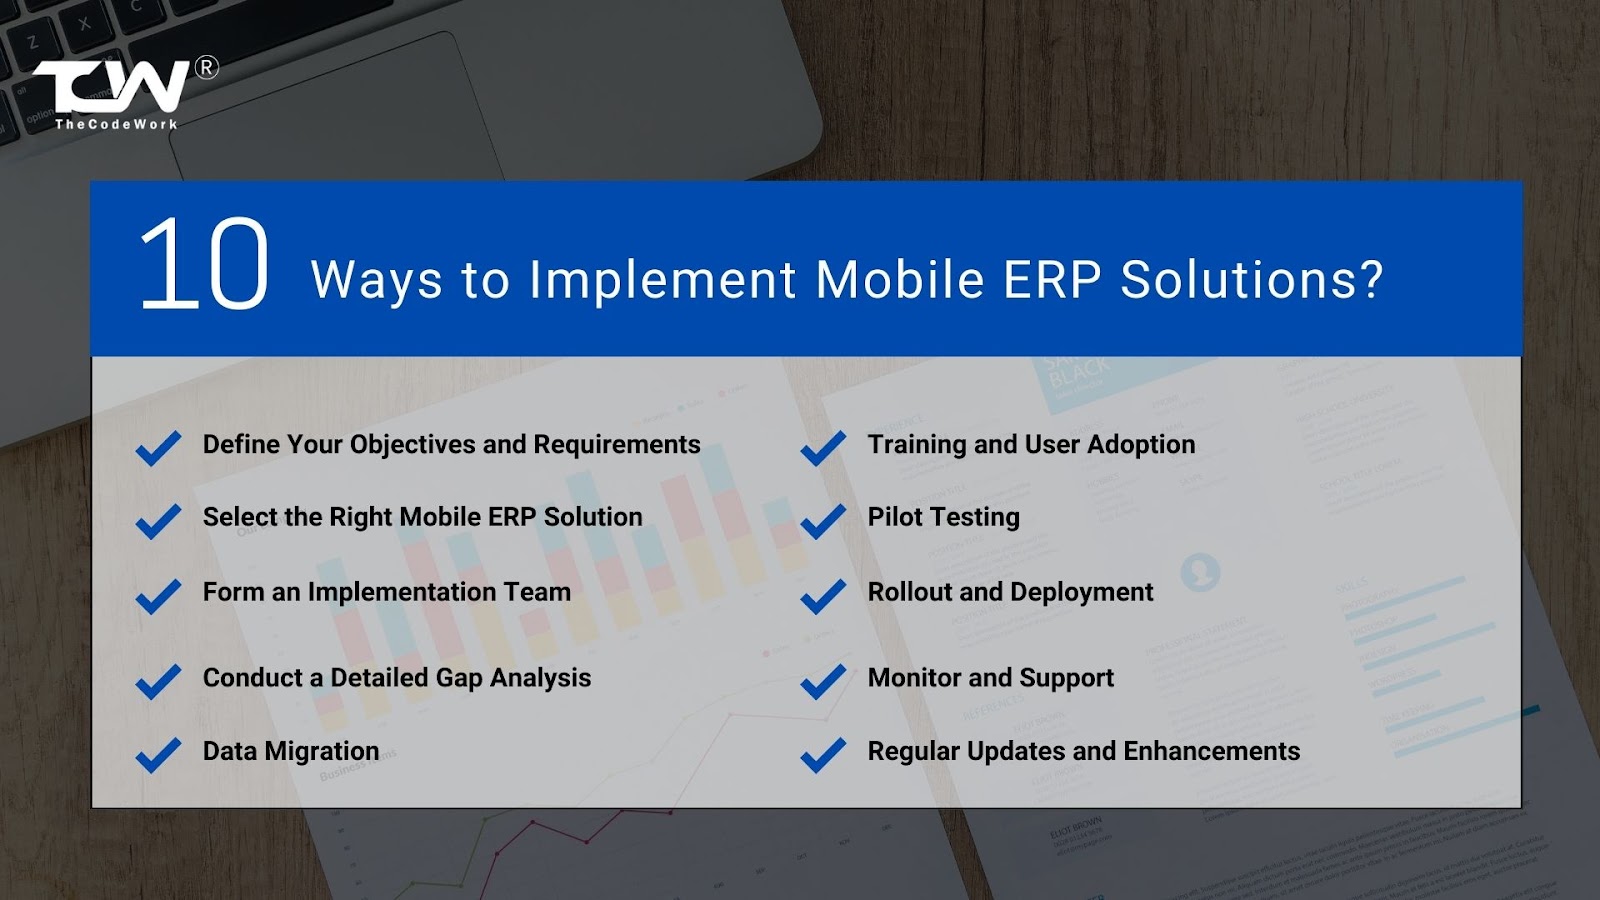 How to implement Mobile ERP Solutions? 